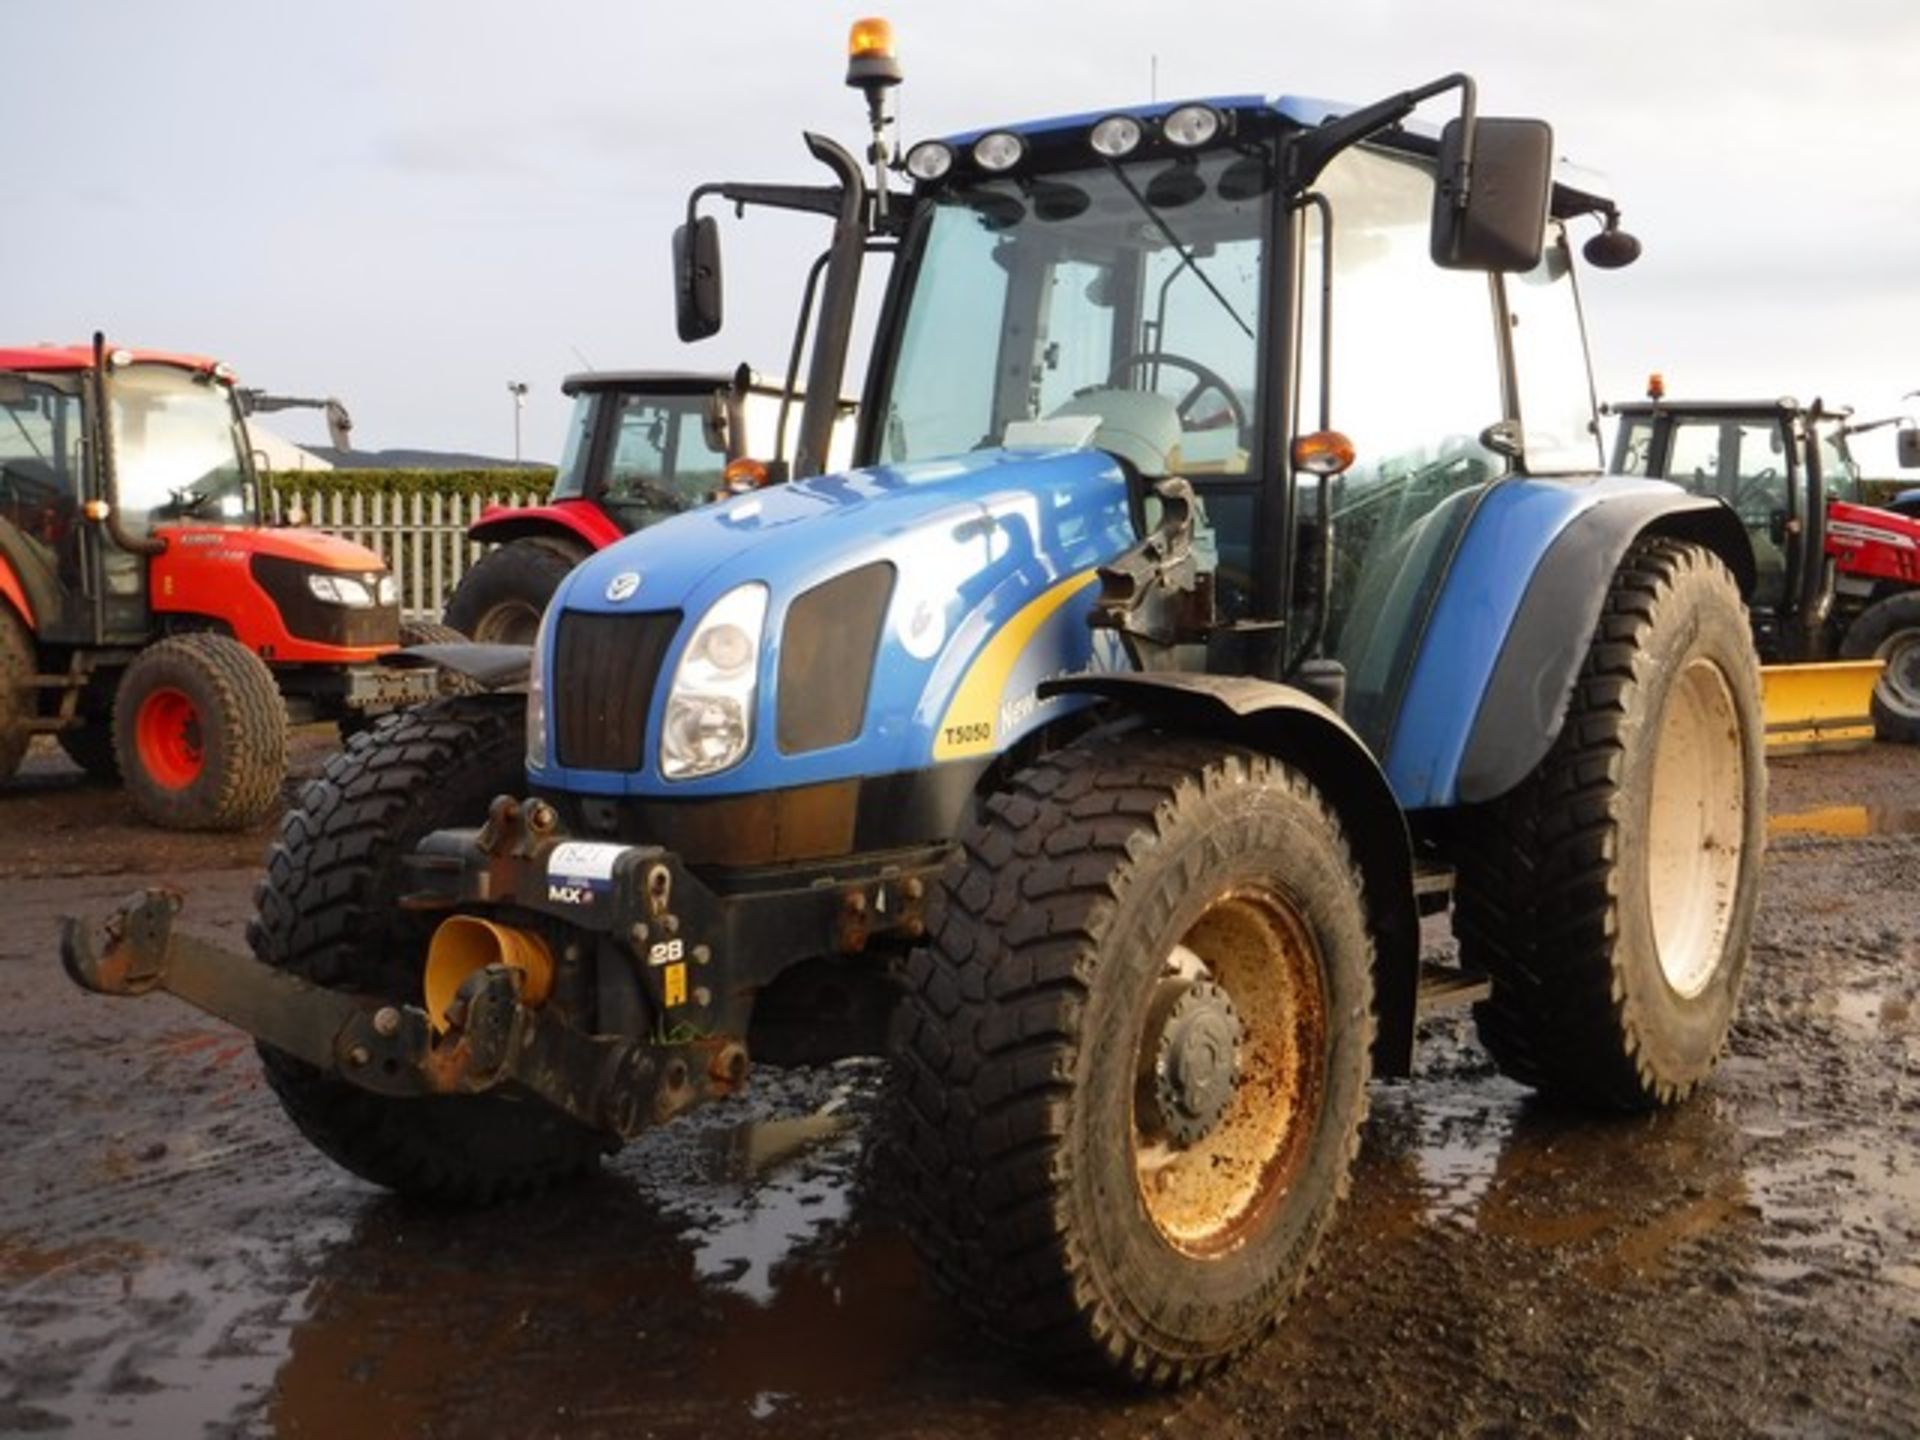 2011 NEW HOLLAND T5050 TRACTOR NP371056 --4063HRS (NOT VERIFIED) FRONT PTO AND LINKAGE, AC, BLUETOOT